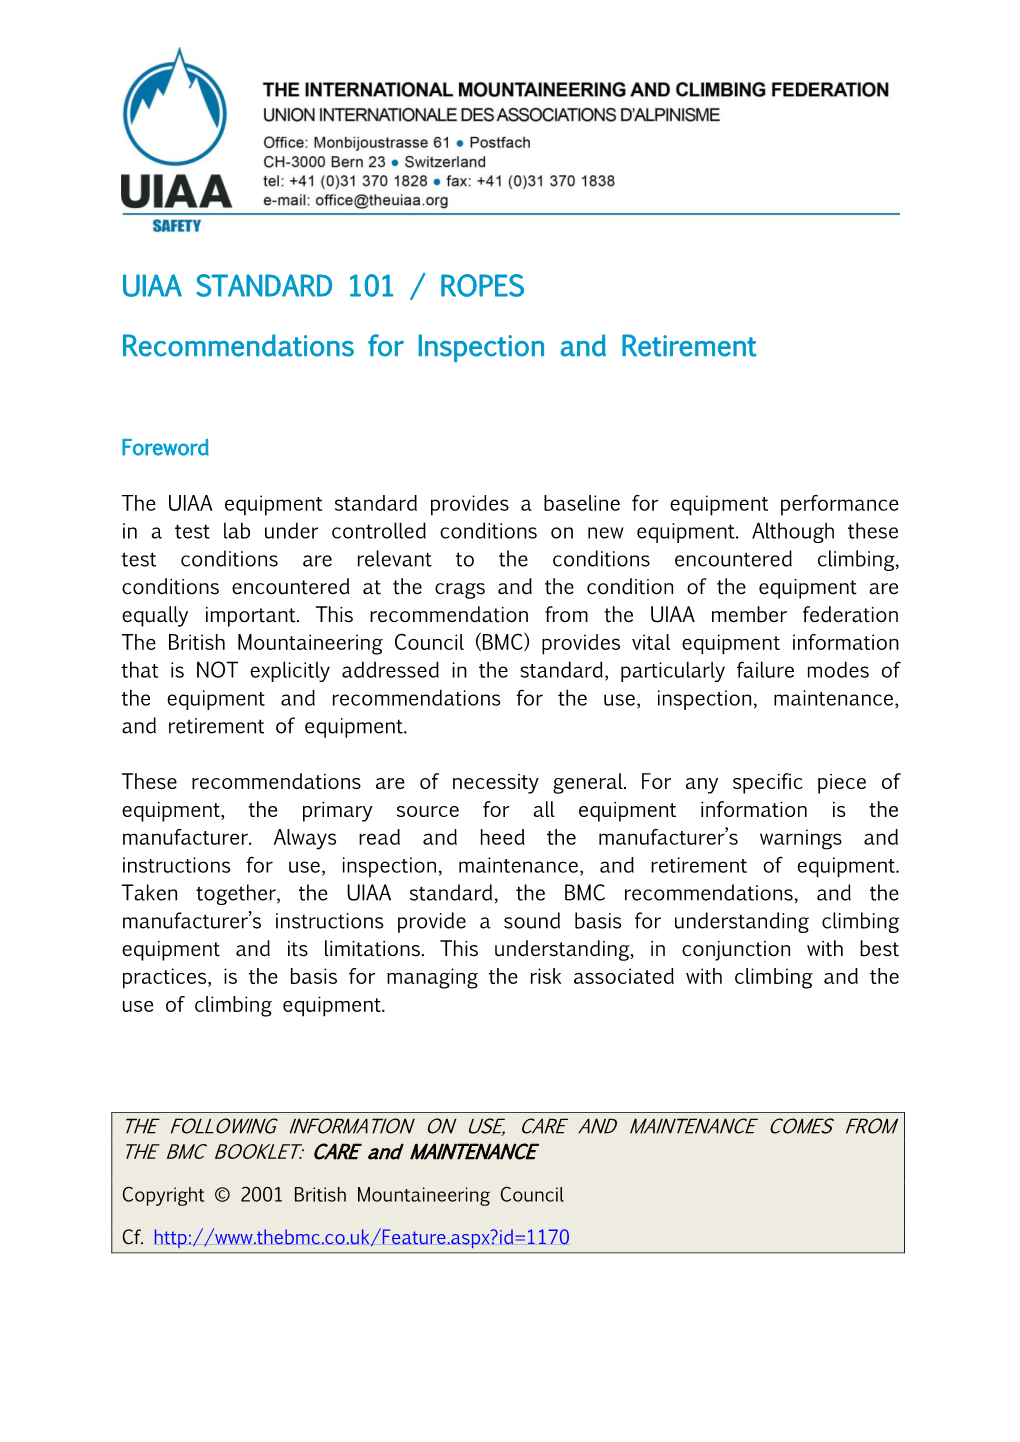 UIAA STANDARD 101 / ROPES Recommendations for Inspection